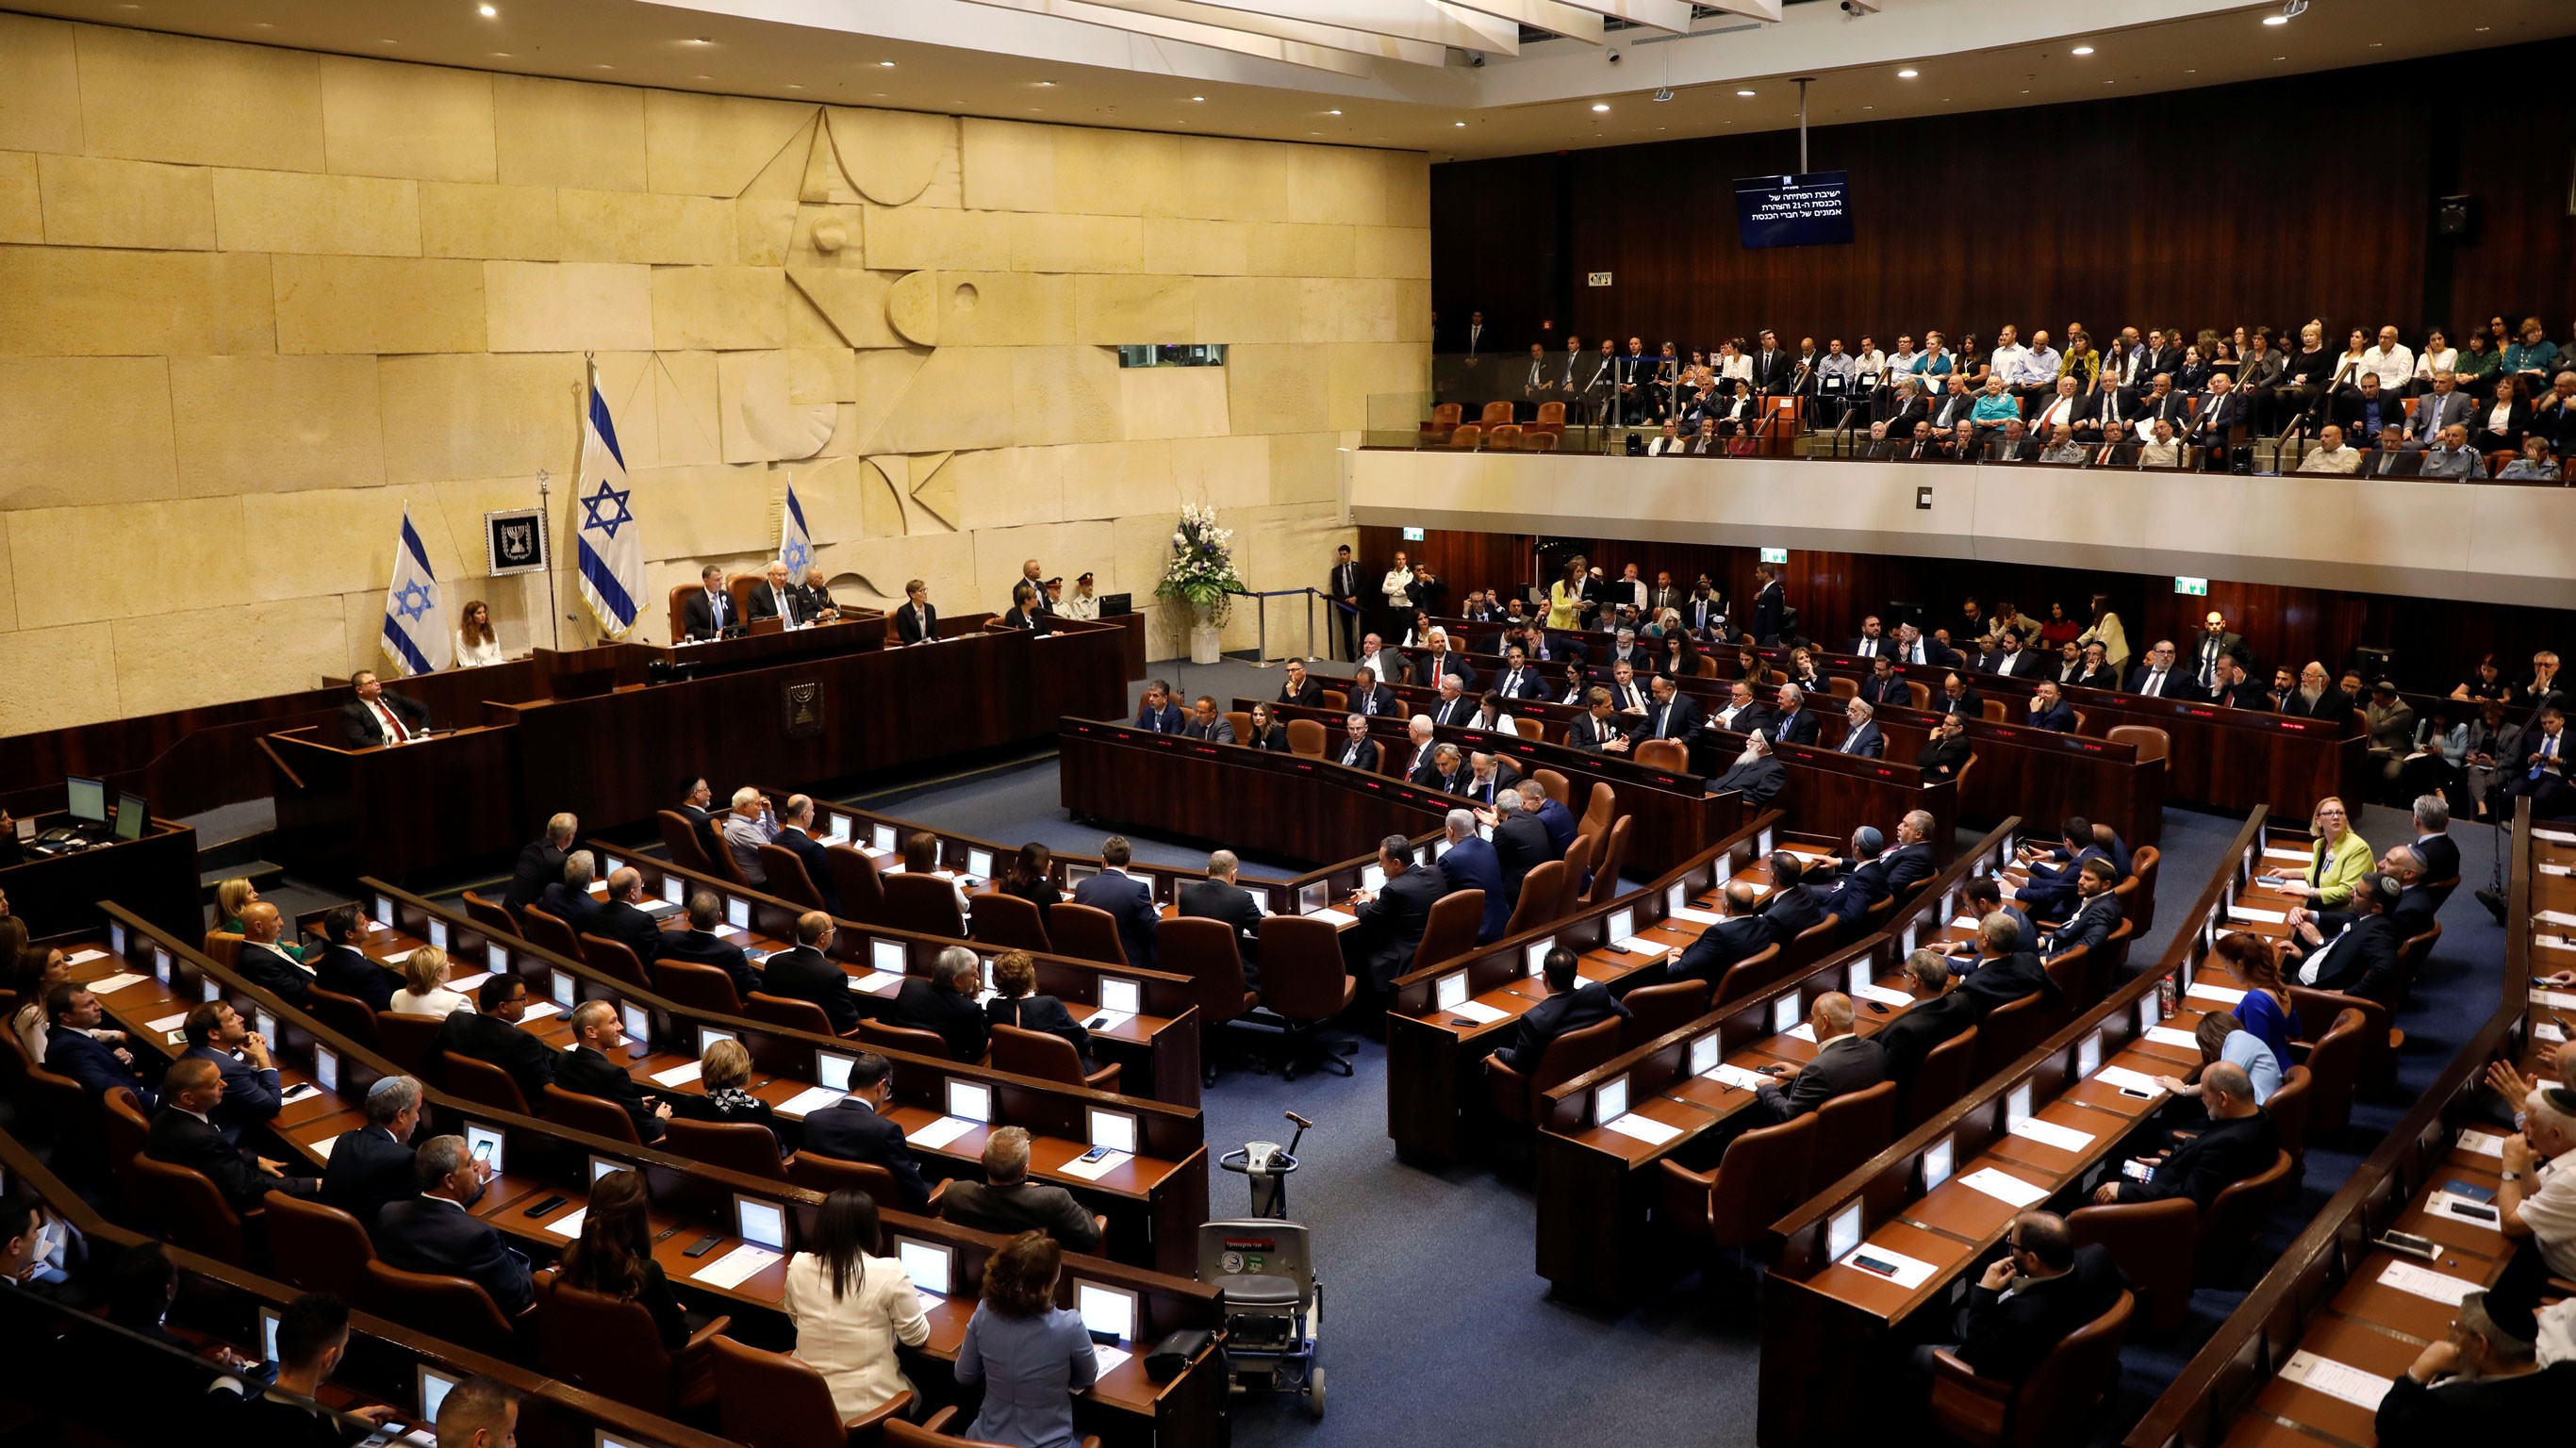 Image result for israel swears in new parliament after divisive election